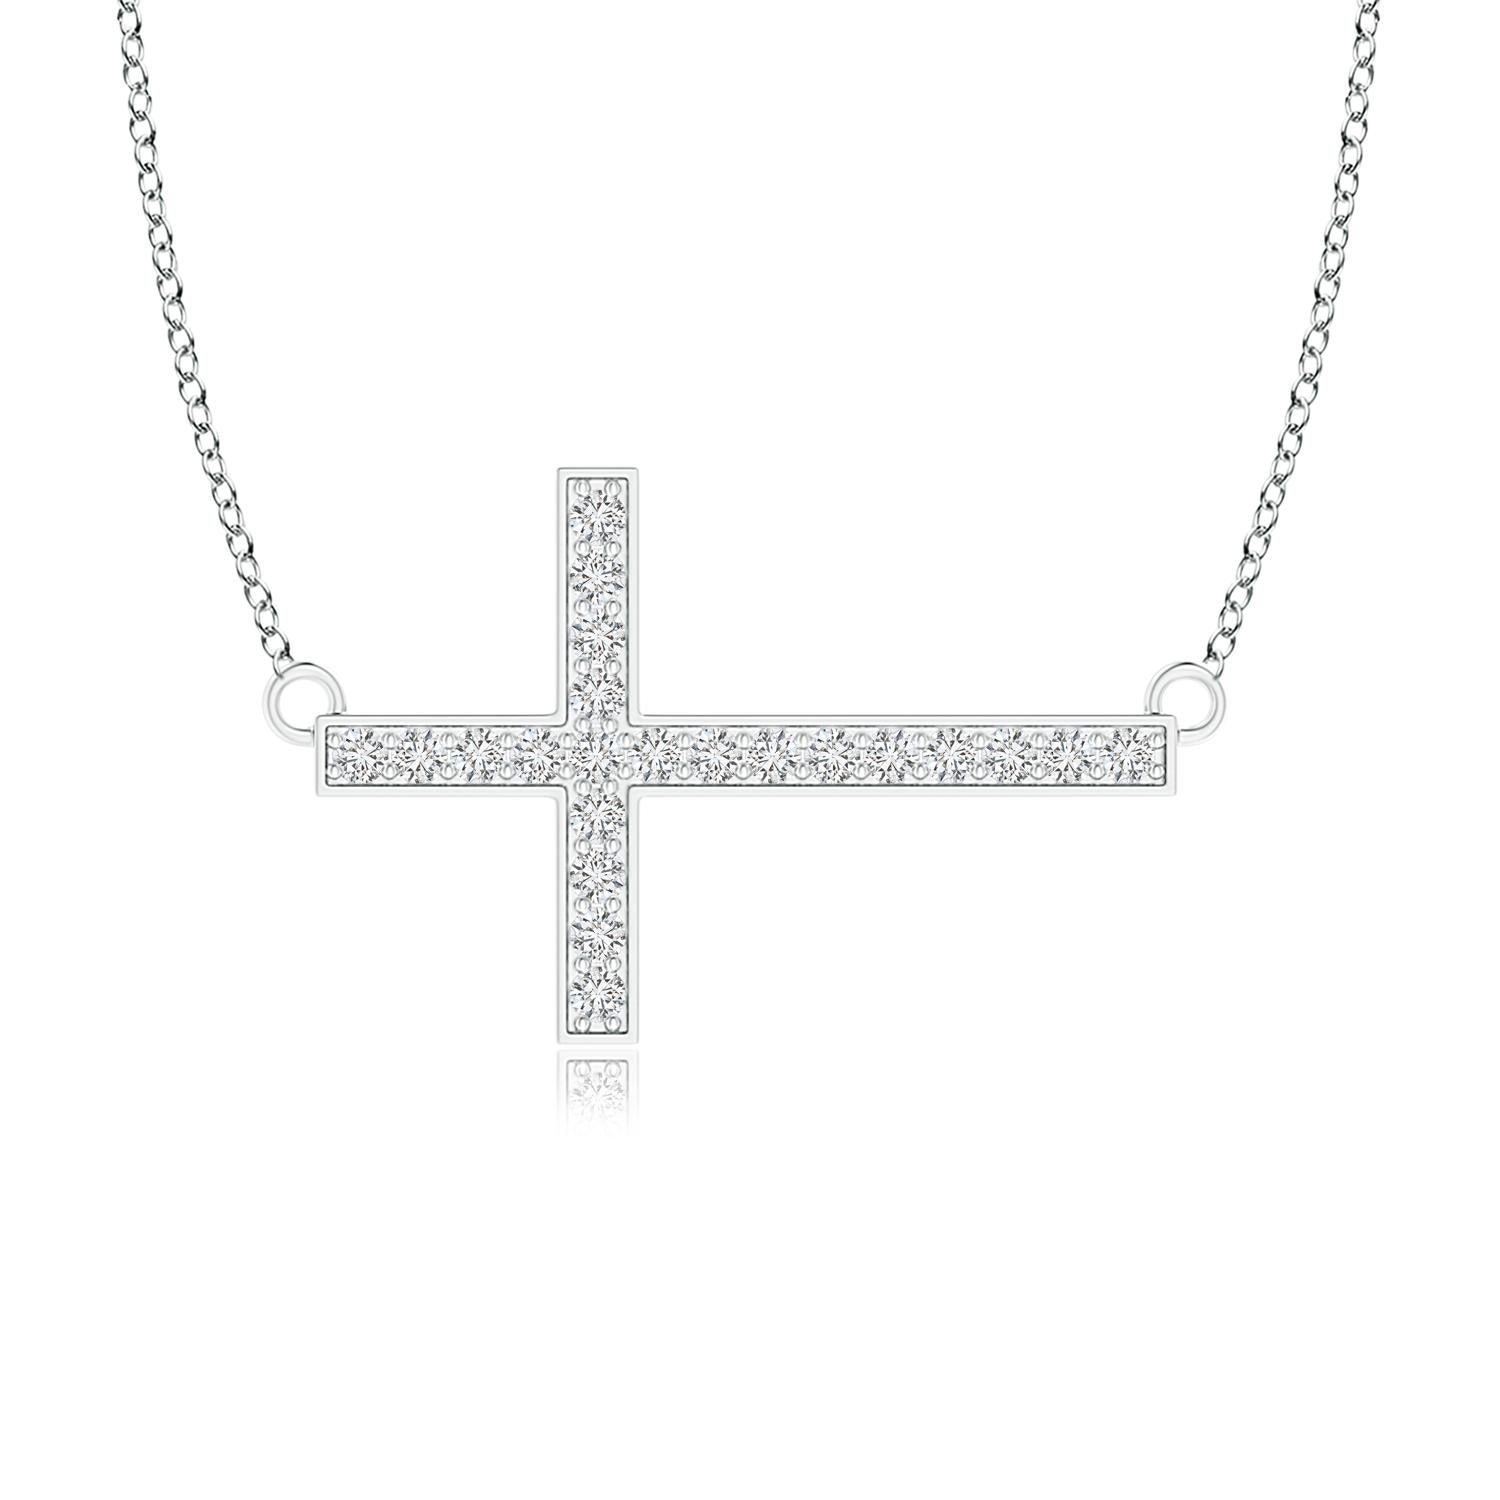 ANGARA Natural Classic 0.1cttw Diamond Cross Necklace in Platinum (Color-H, SI2)